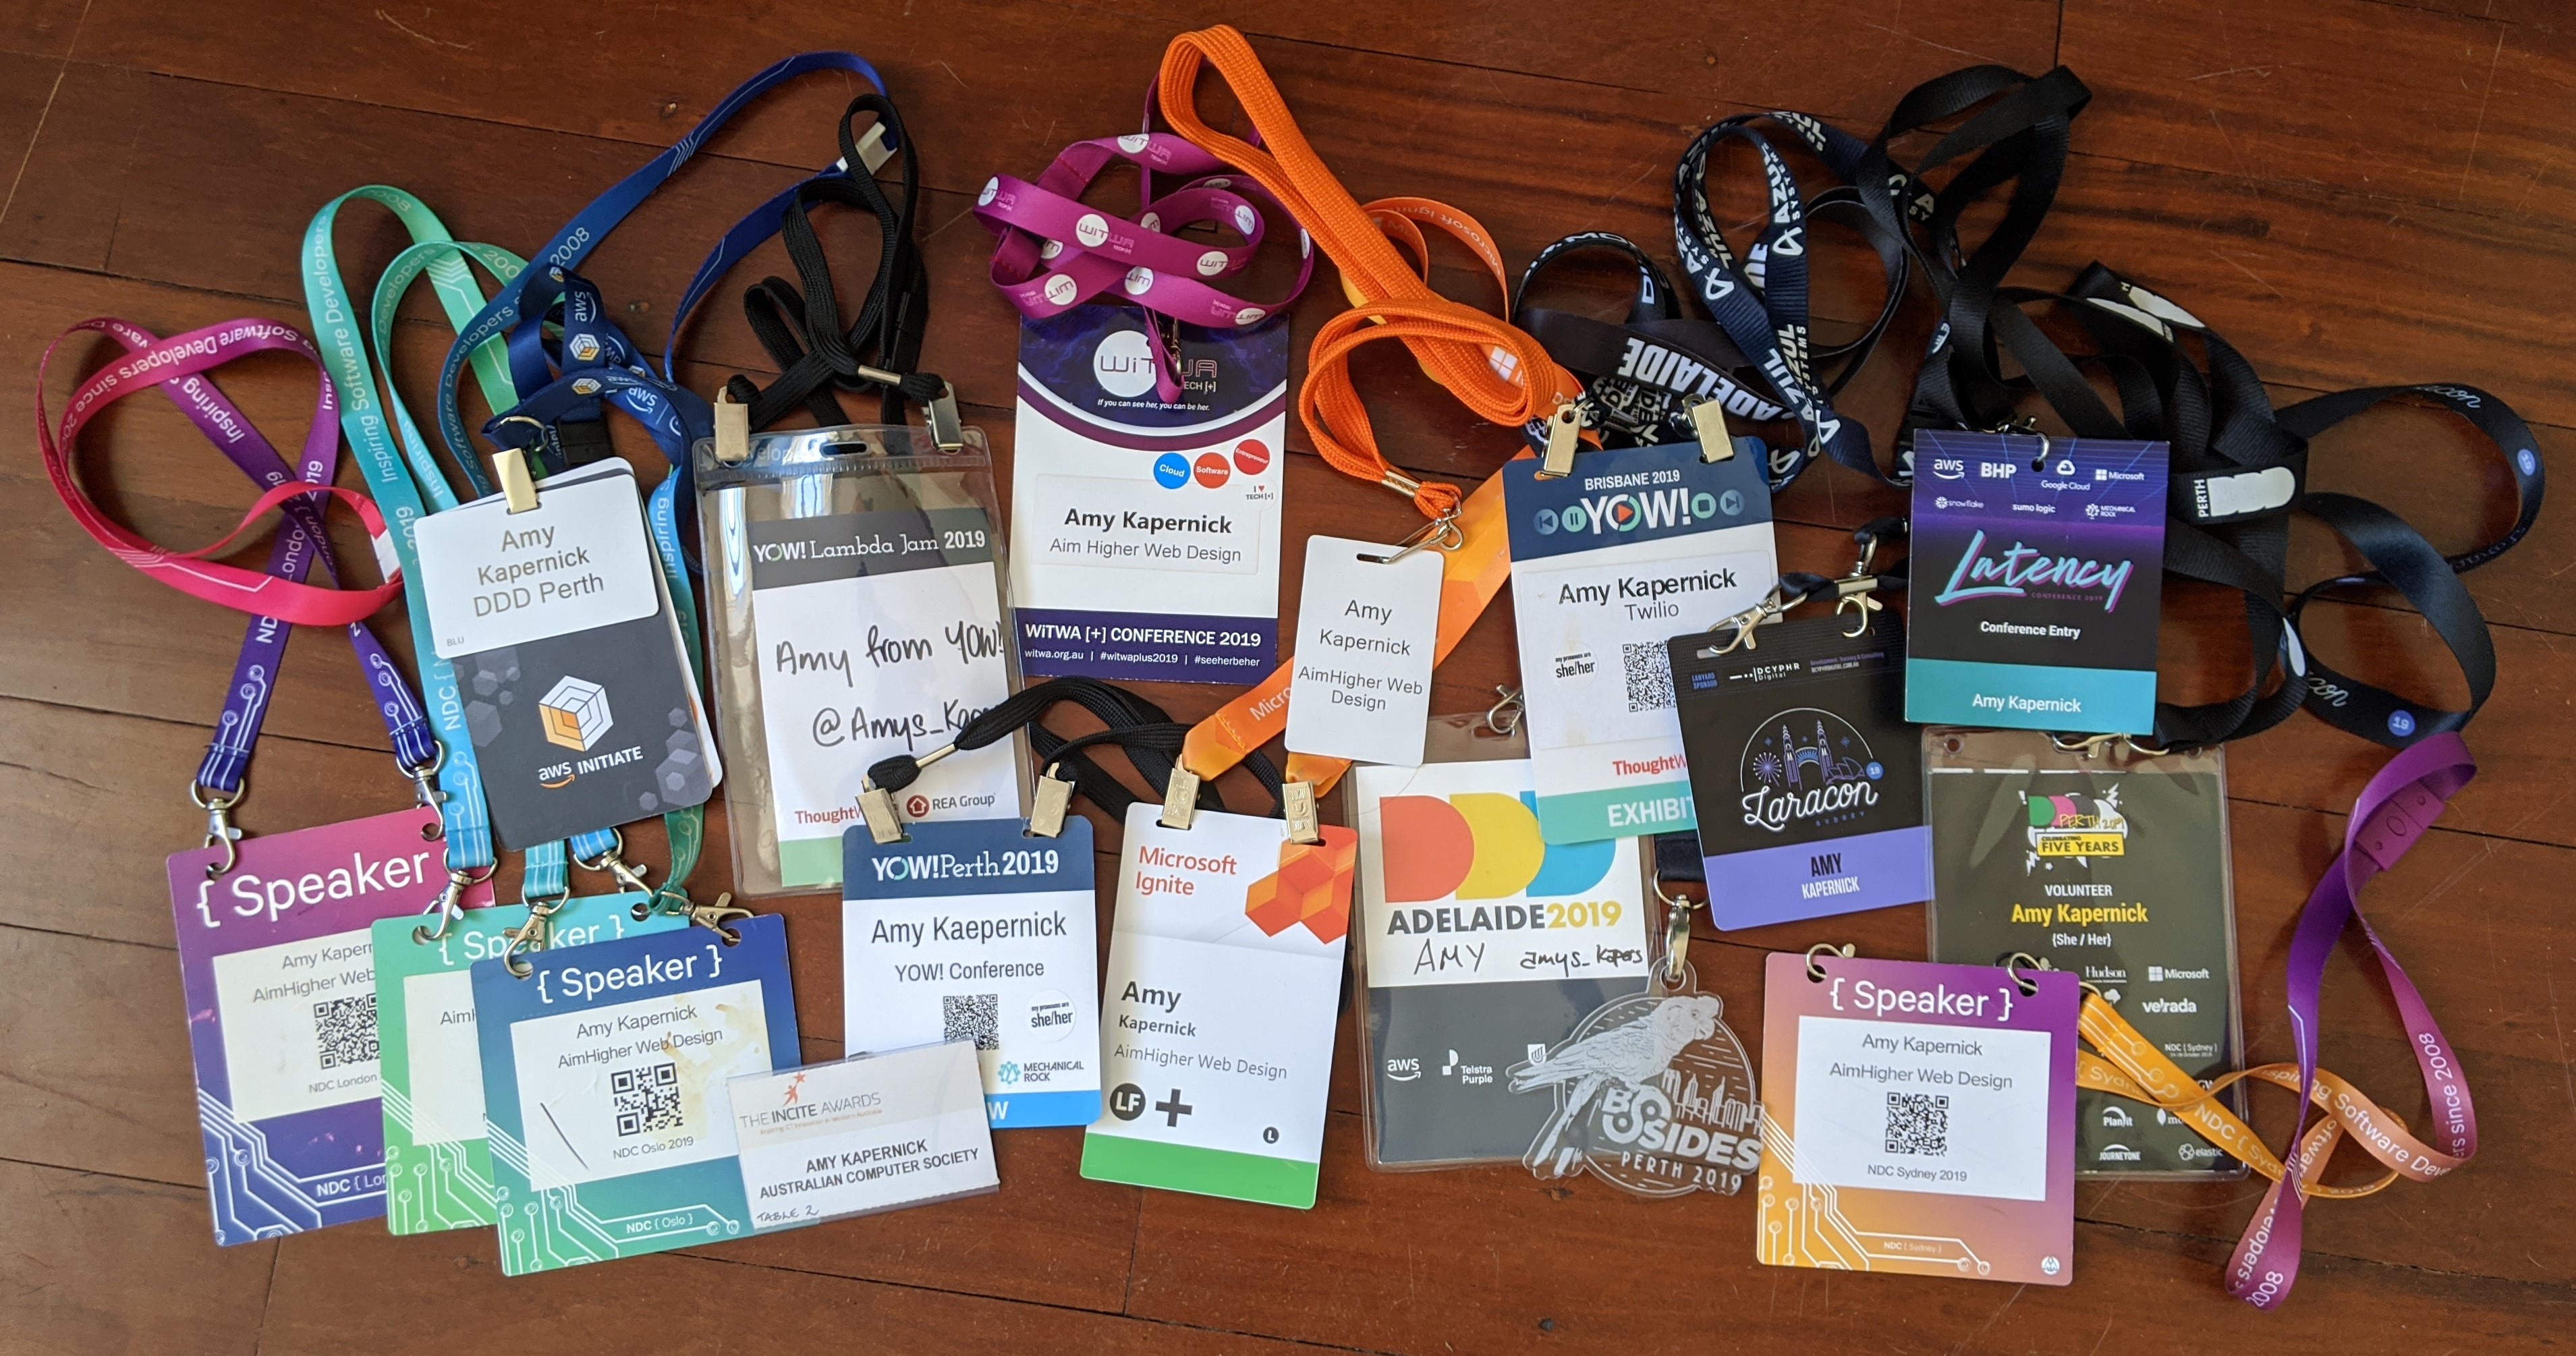 Collection of my conference lanyards from 2019 events